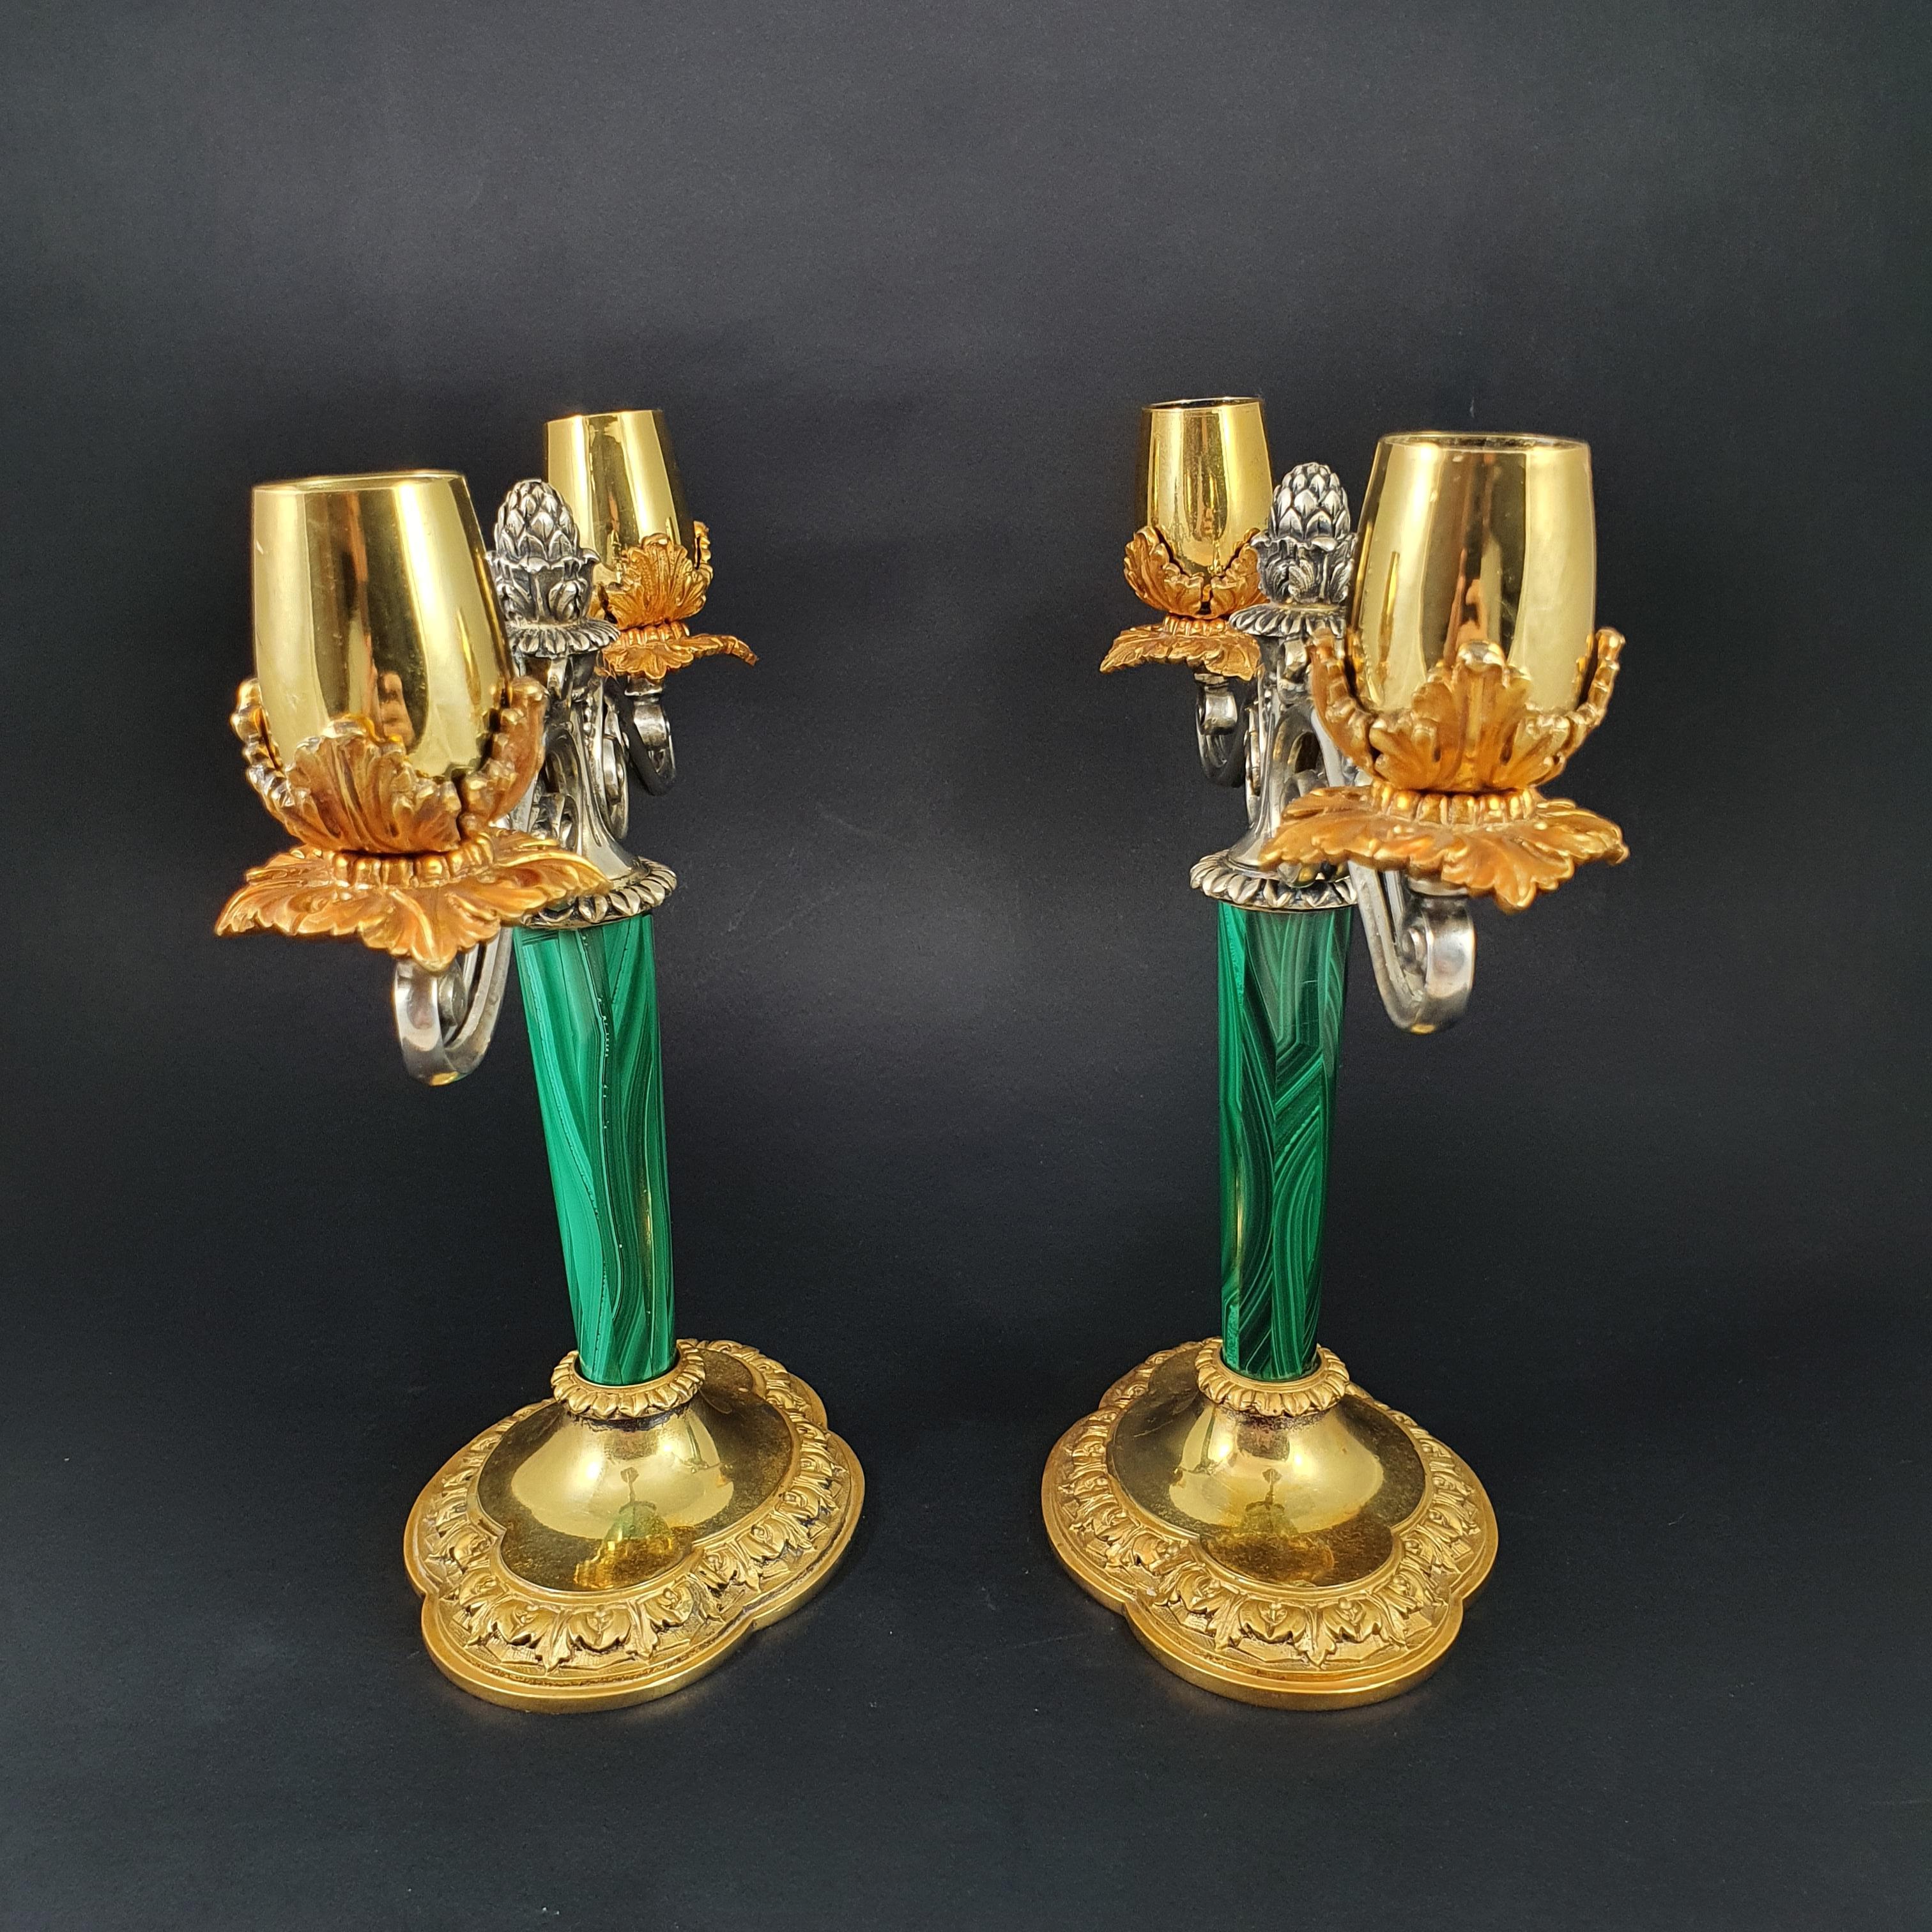 Late 20th Century Italian Pair of Candlesticks in Solid Silver, Gilt and Malachite